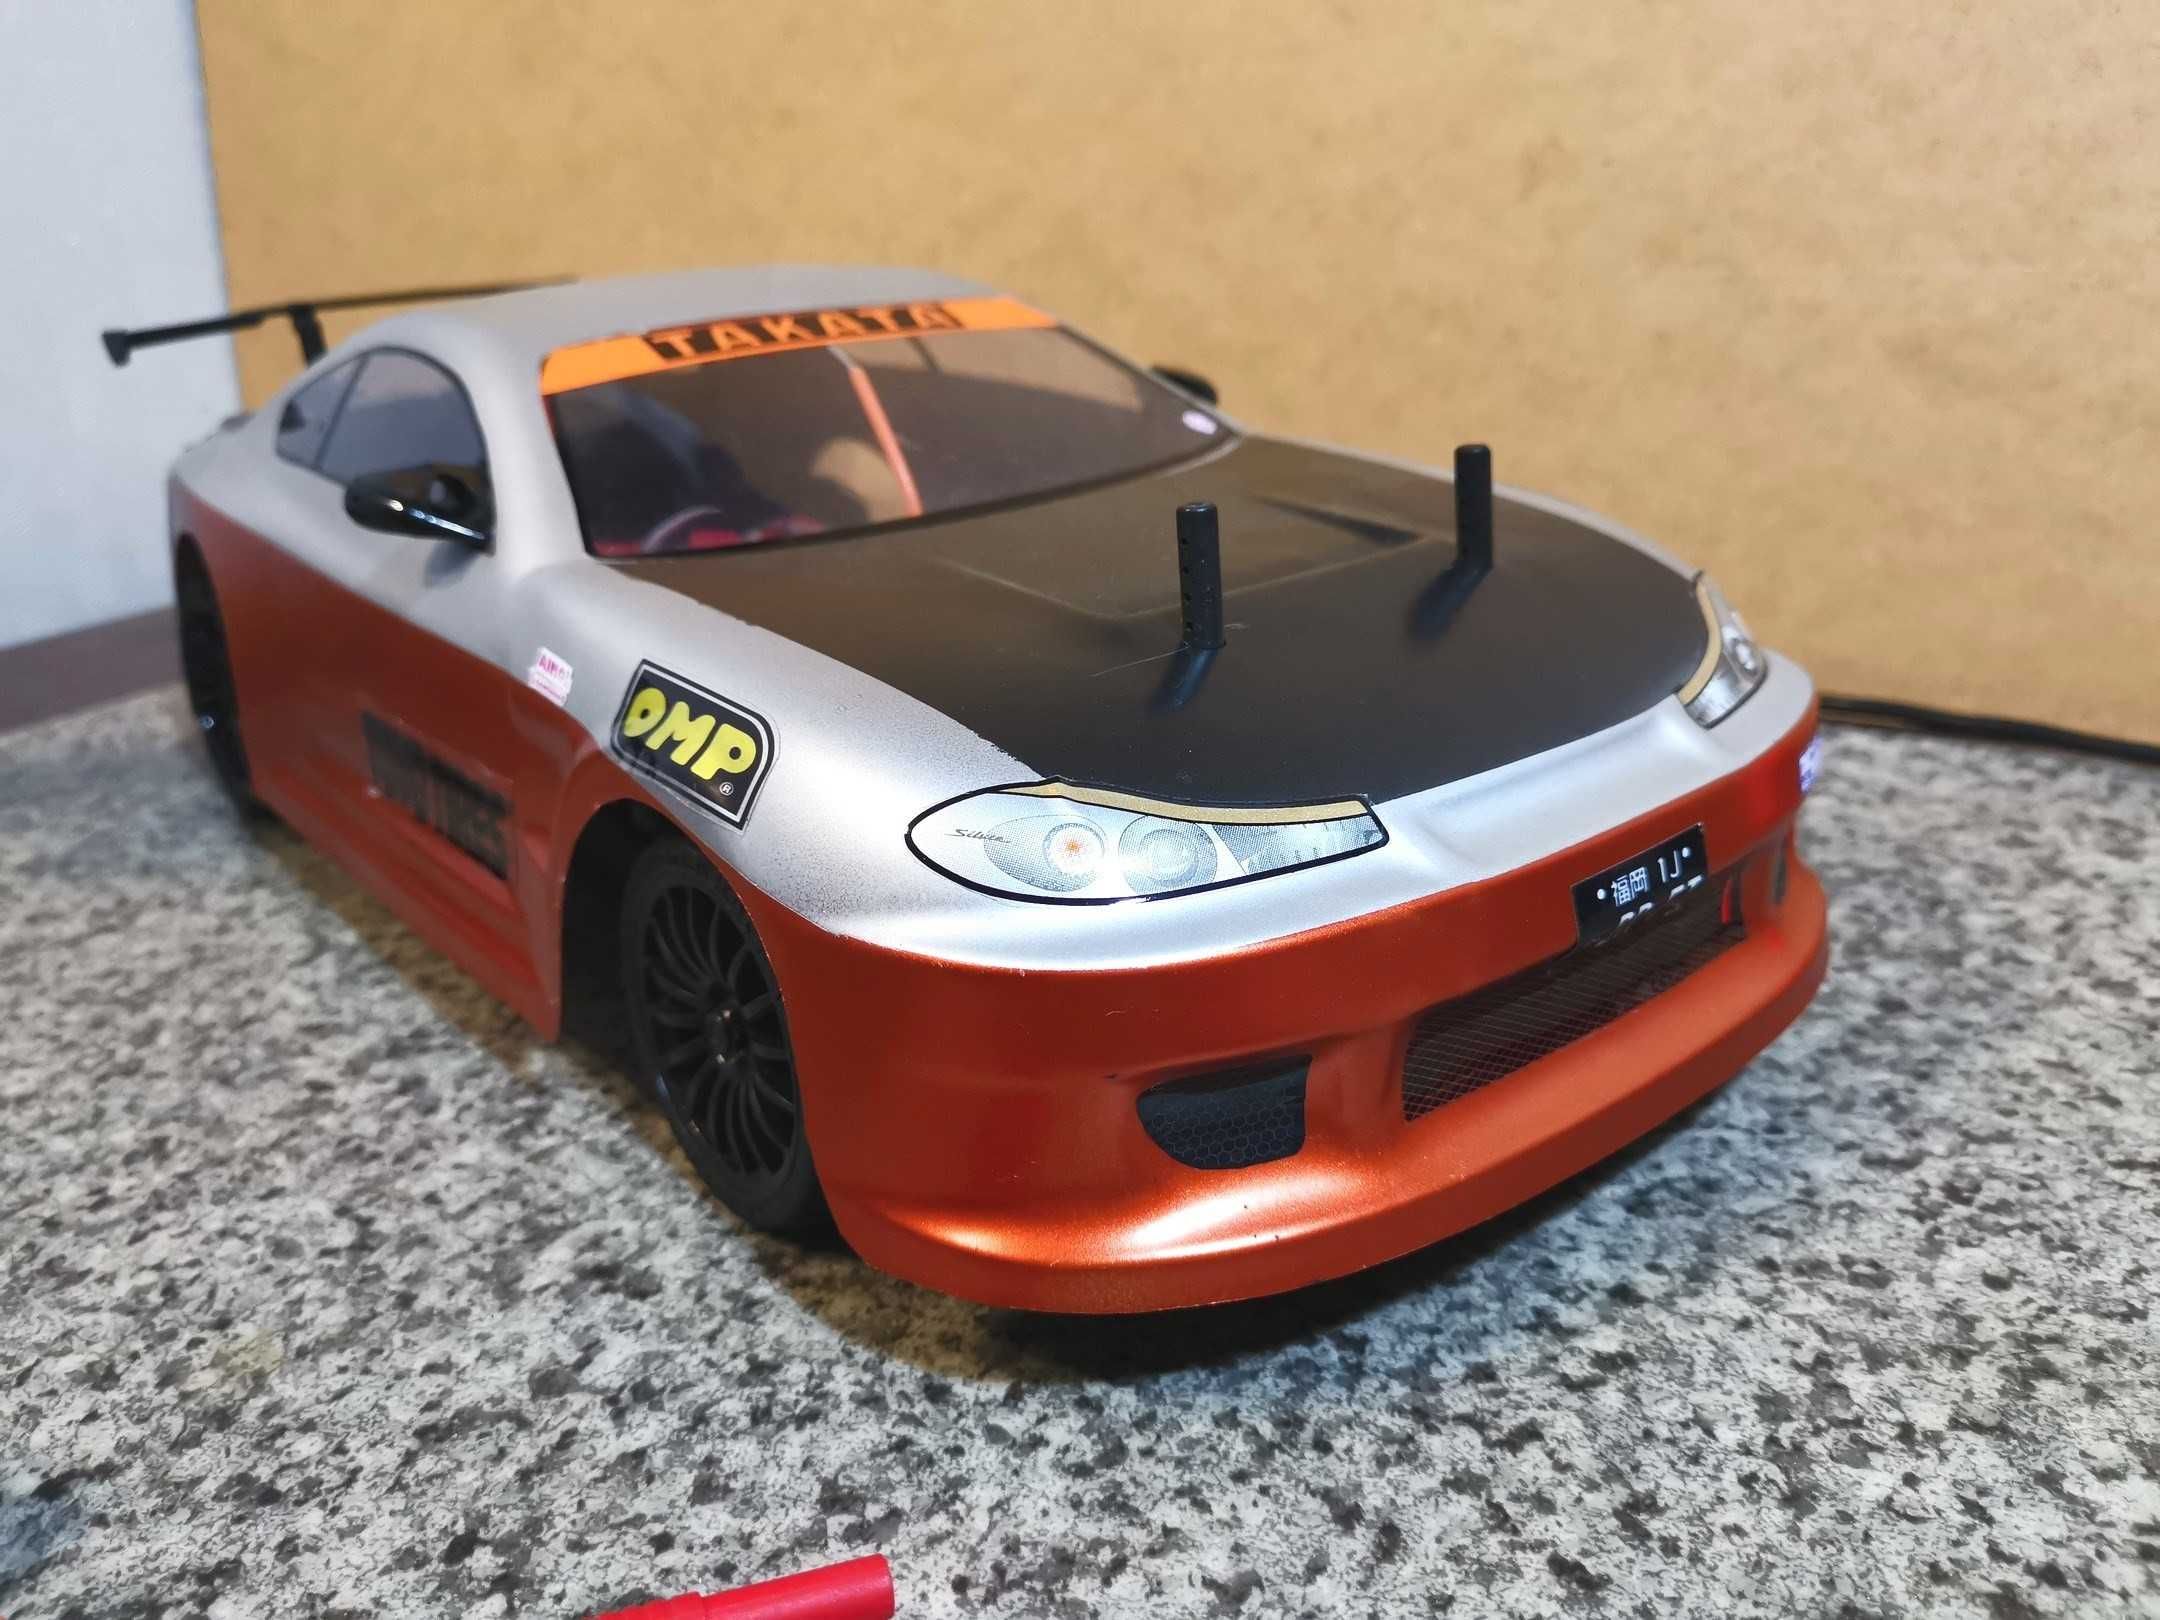 RC машинка Exceed Mad Speed Brushless 1/10 шосе дріфт безколекторна